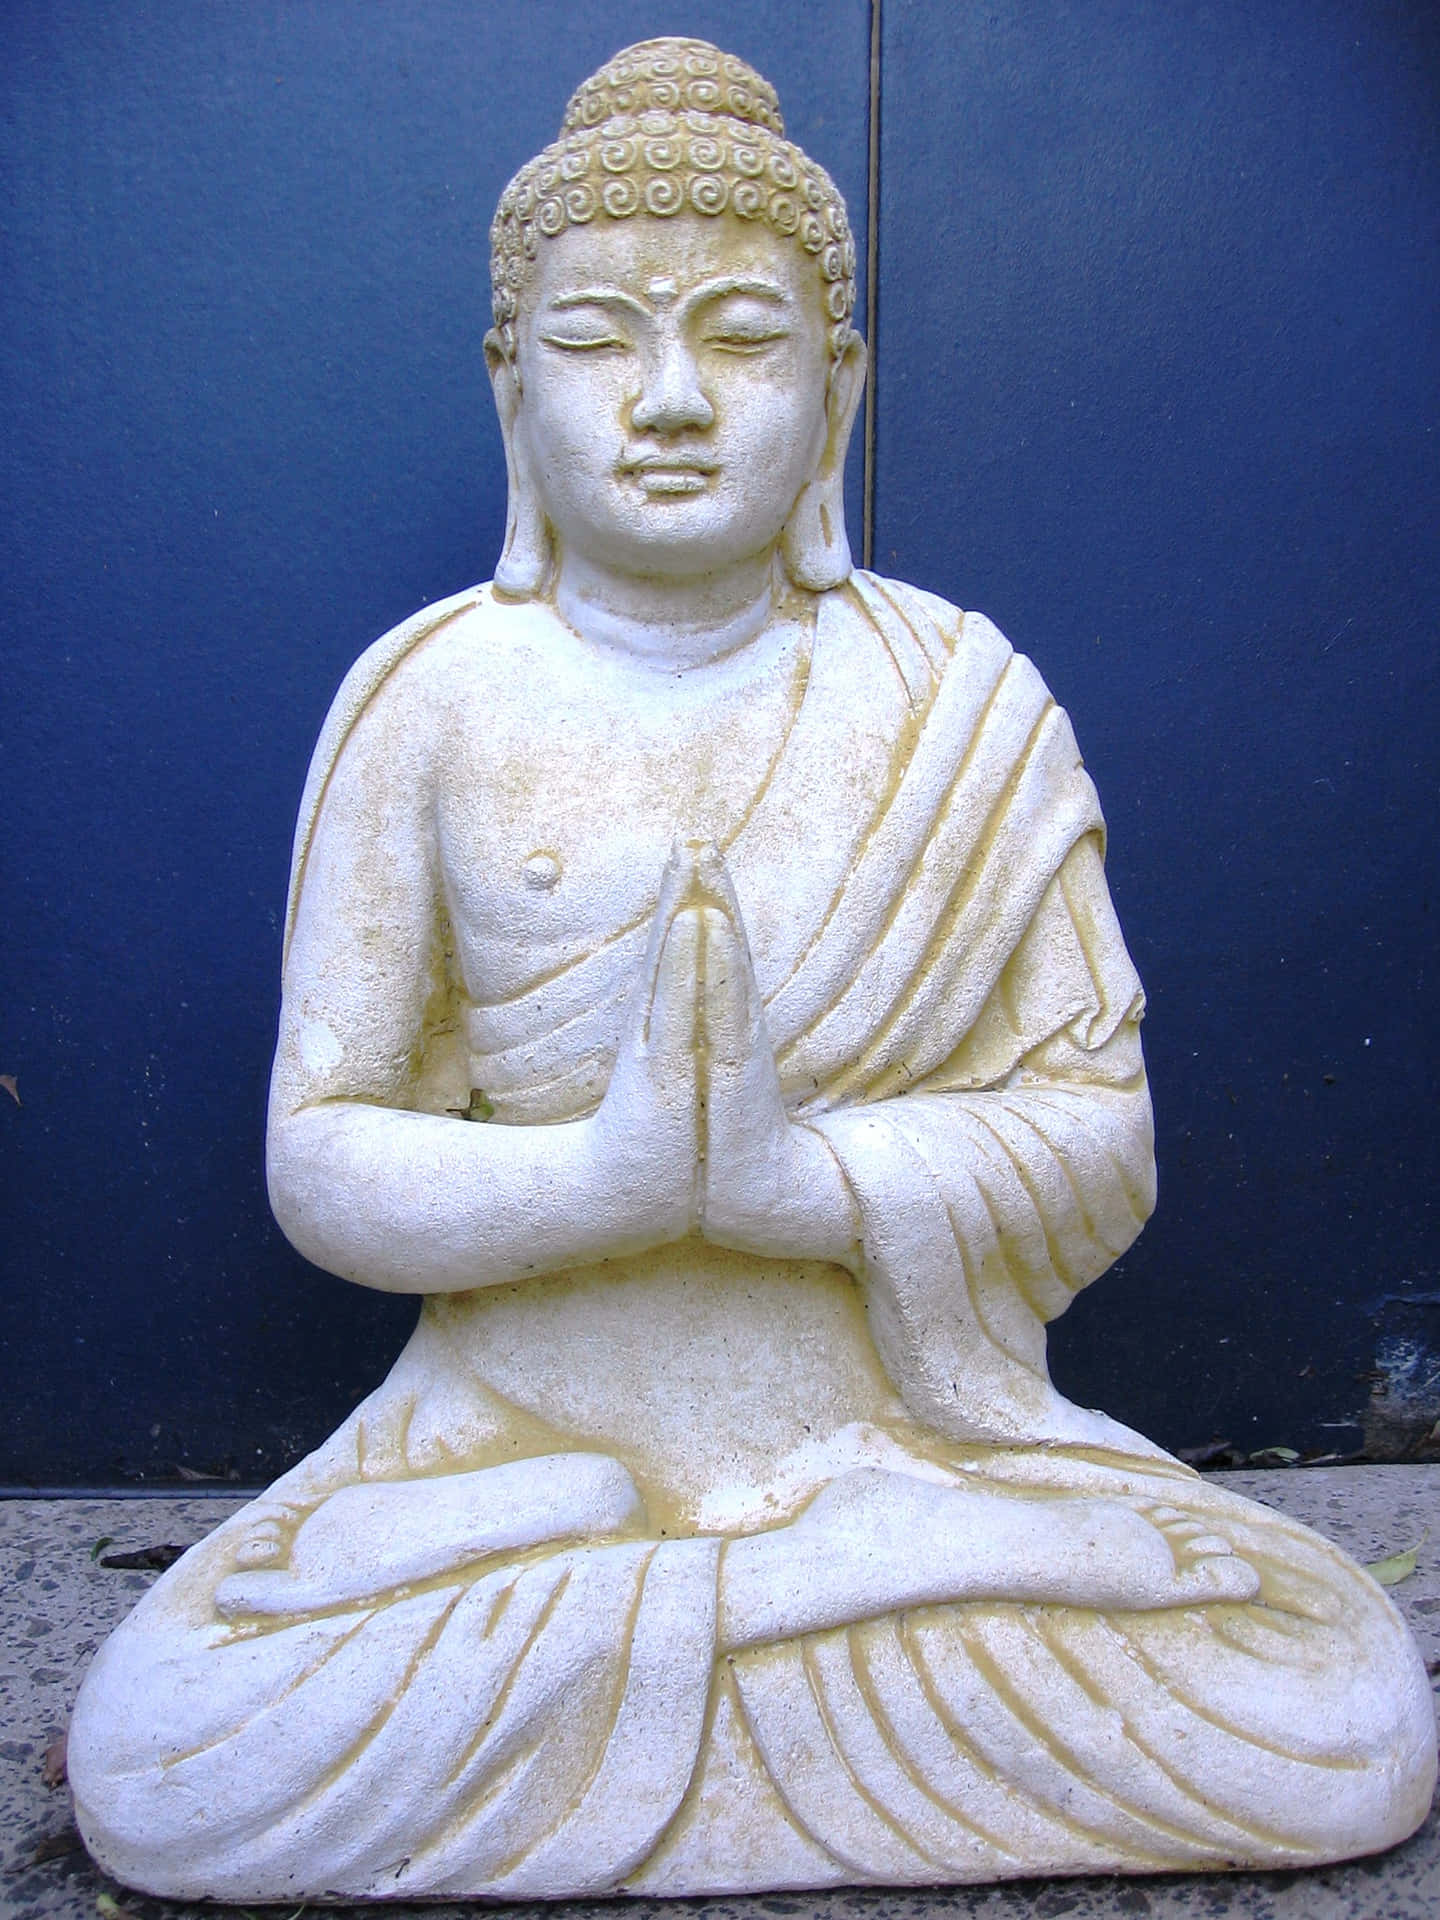 A Buddha Statue Is Sitting On The Ground